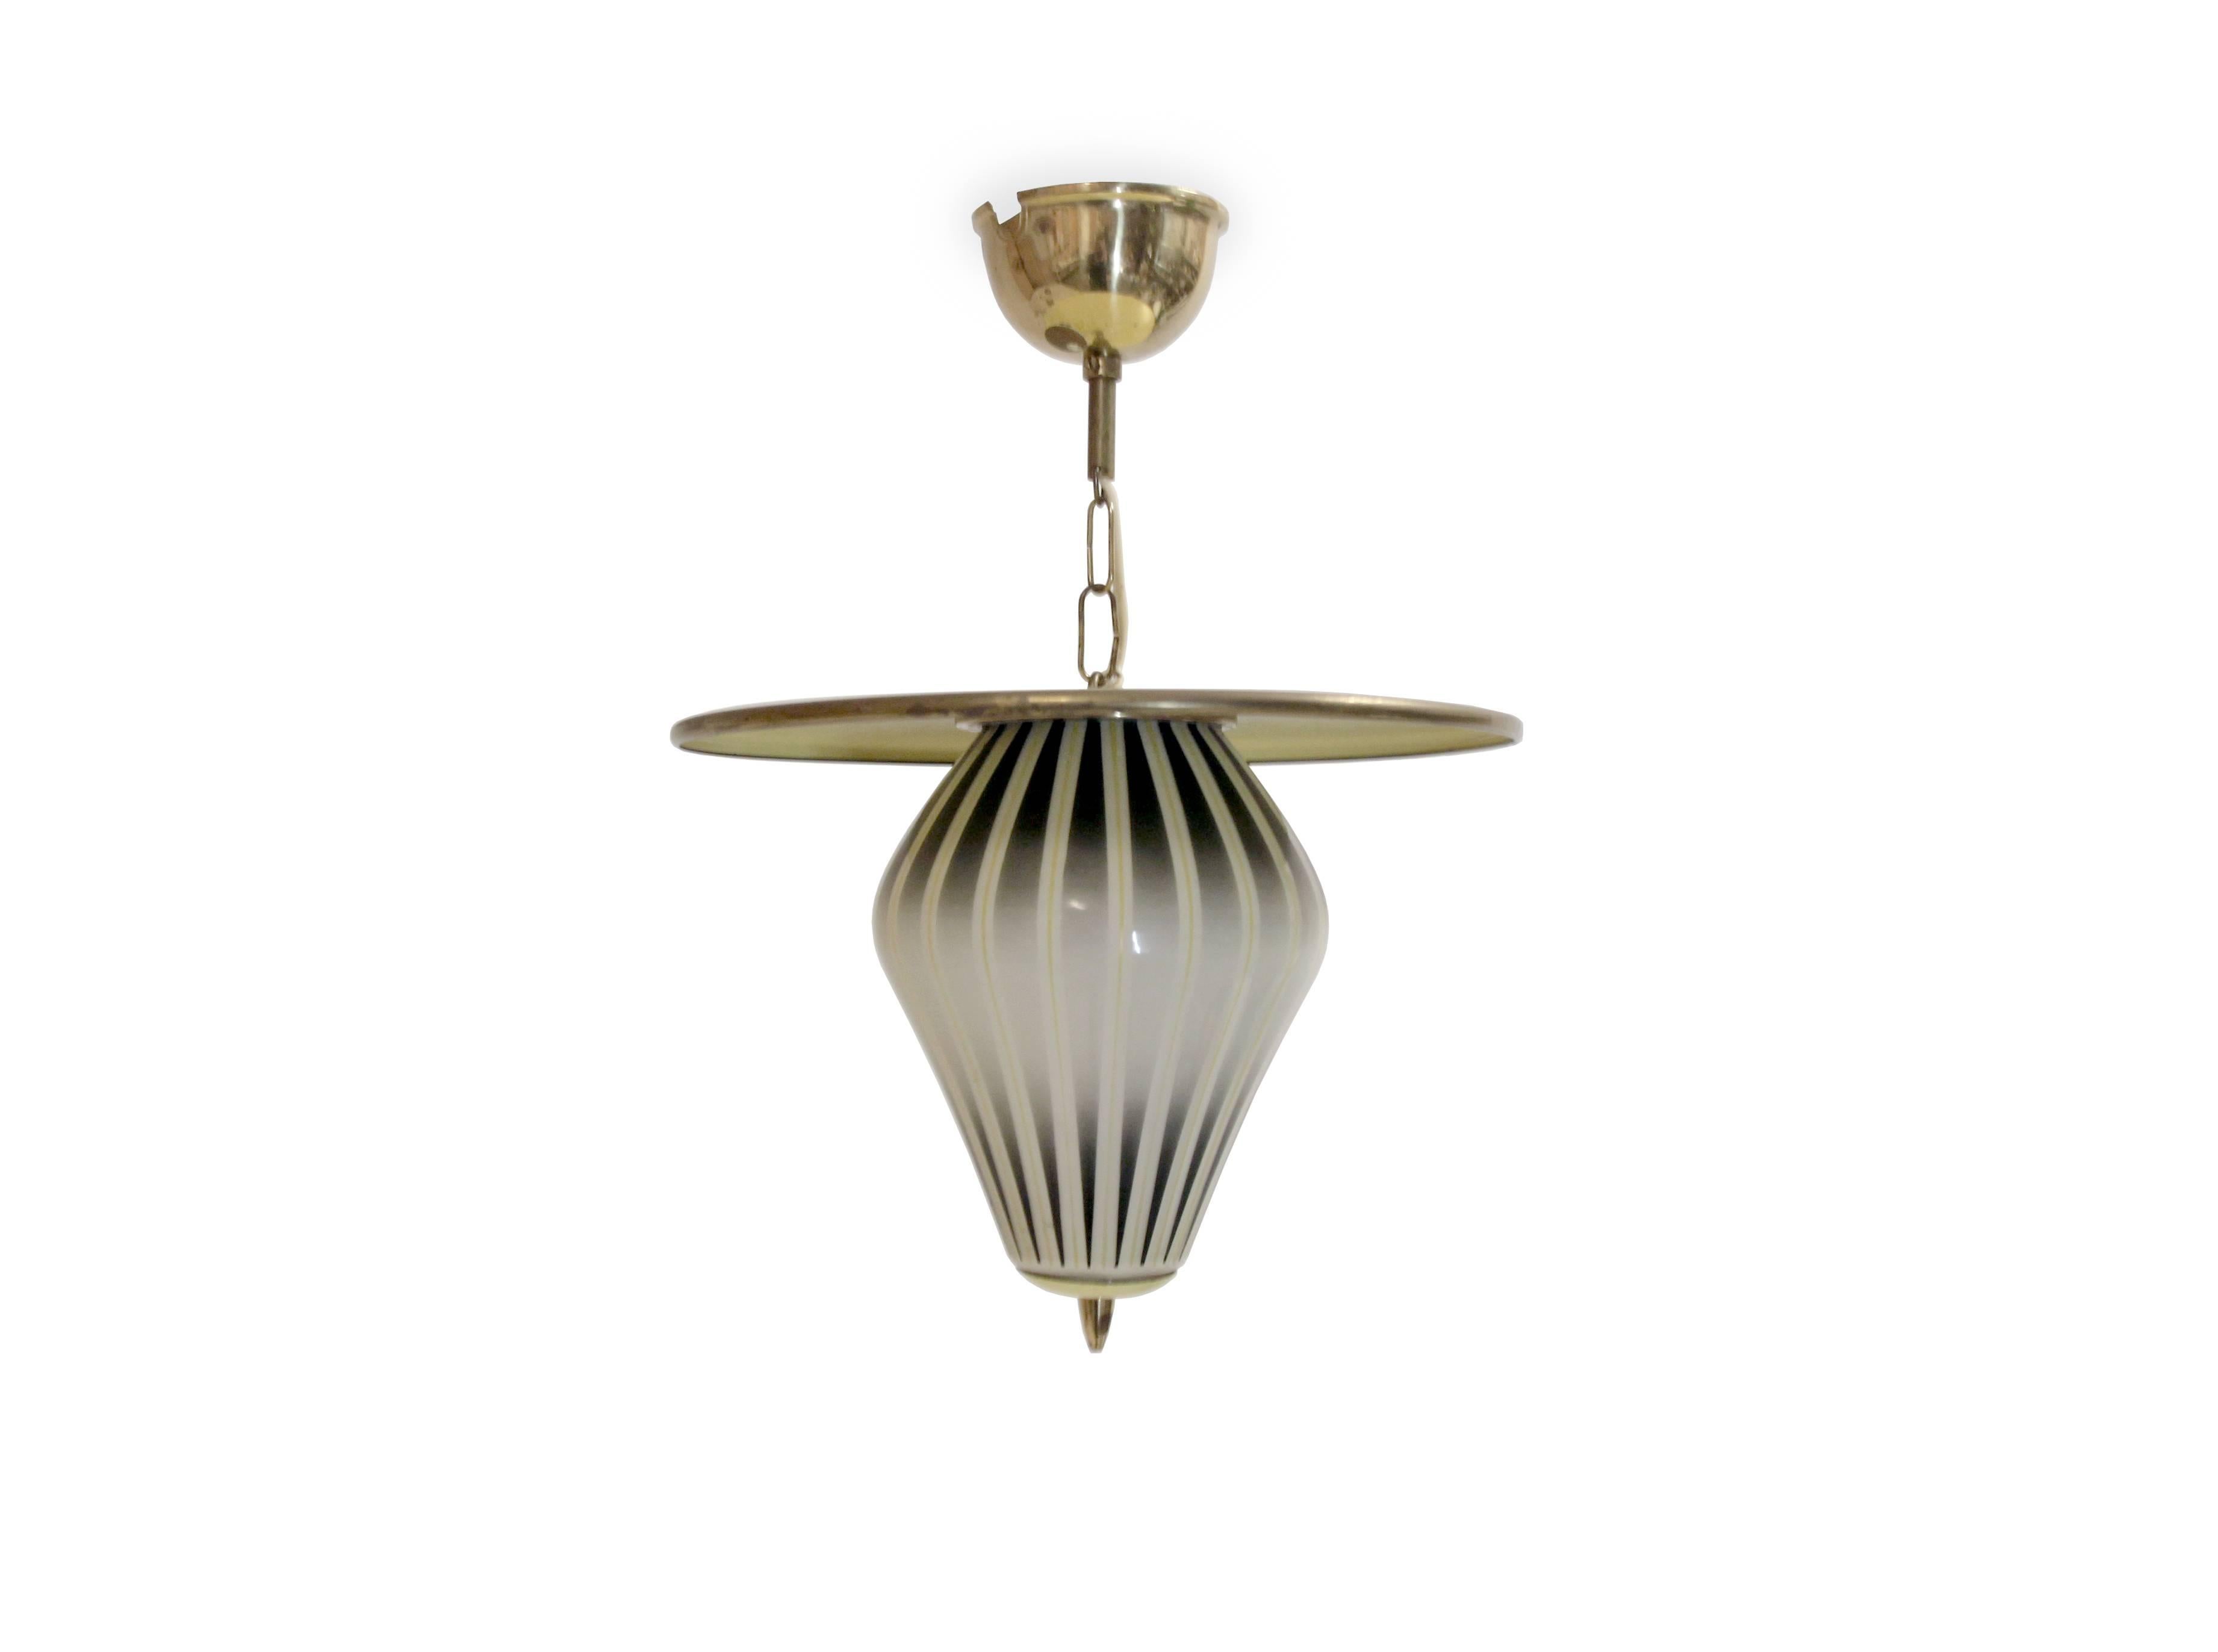 Wonderful and decorative ceiling lamp in steel, brass and shade in glass. Designed and made in Norway by Elegant Belysning from circa 1960s first half. The lamp is fully working and in good vintage condition.